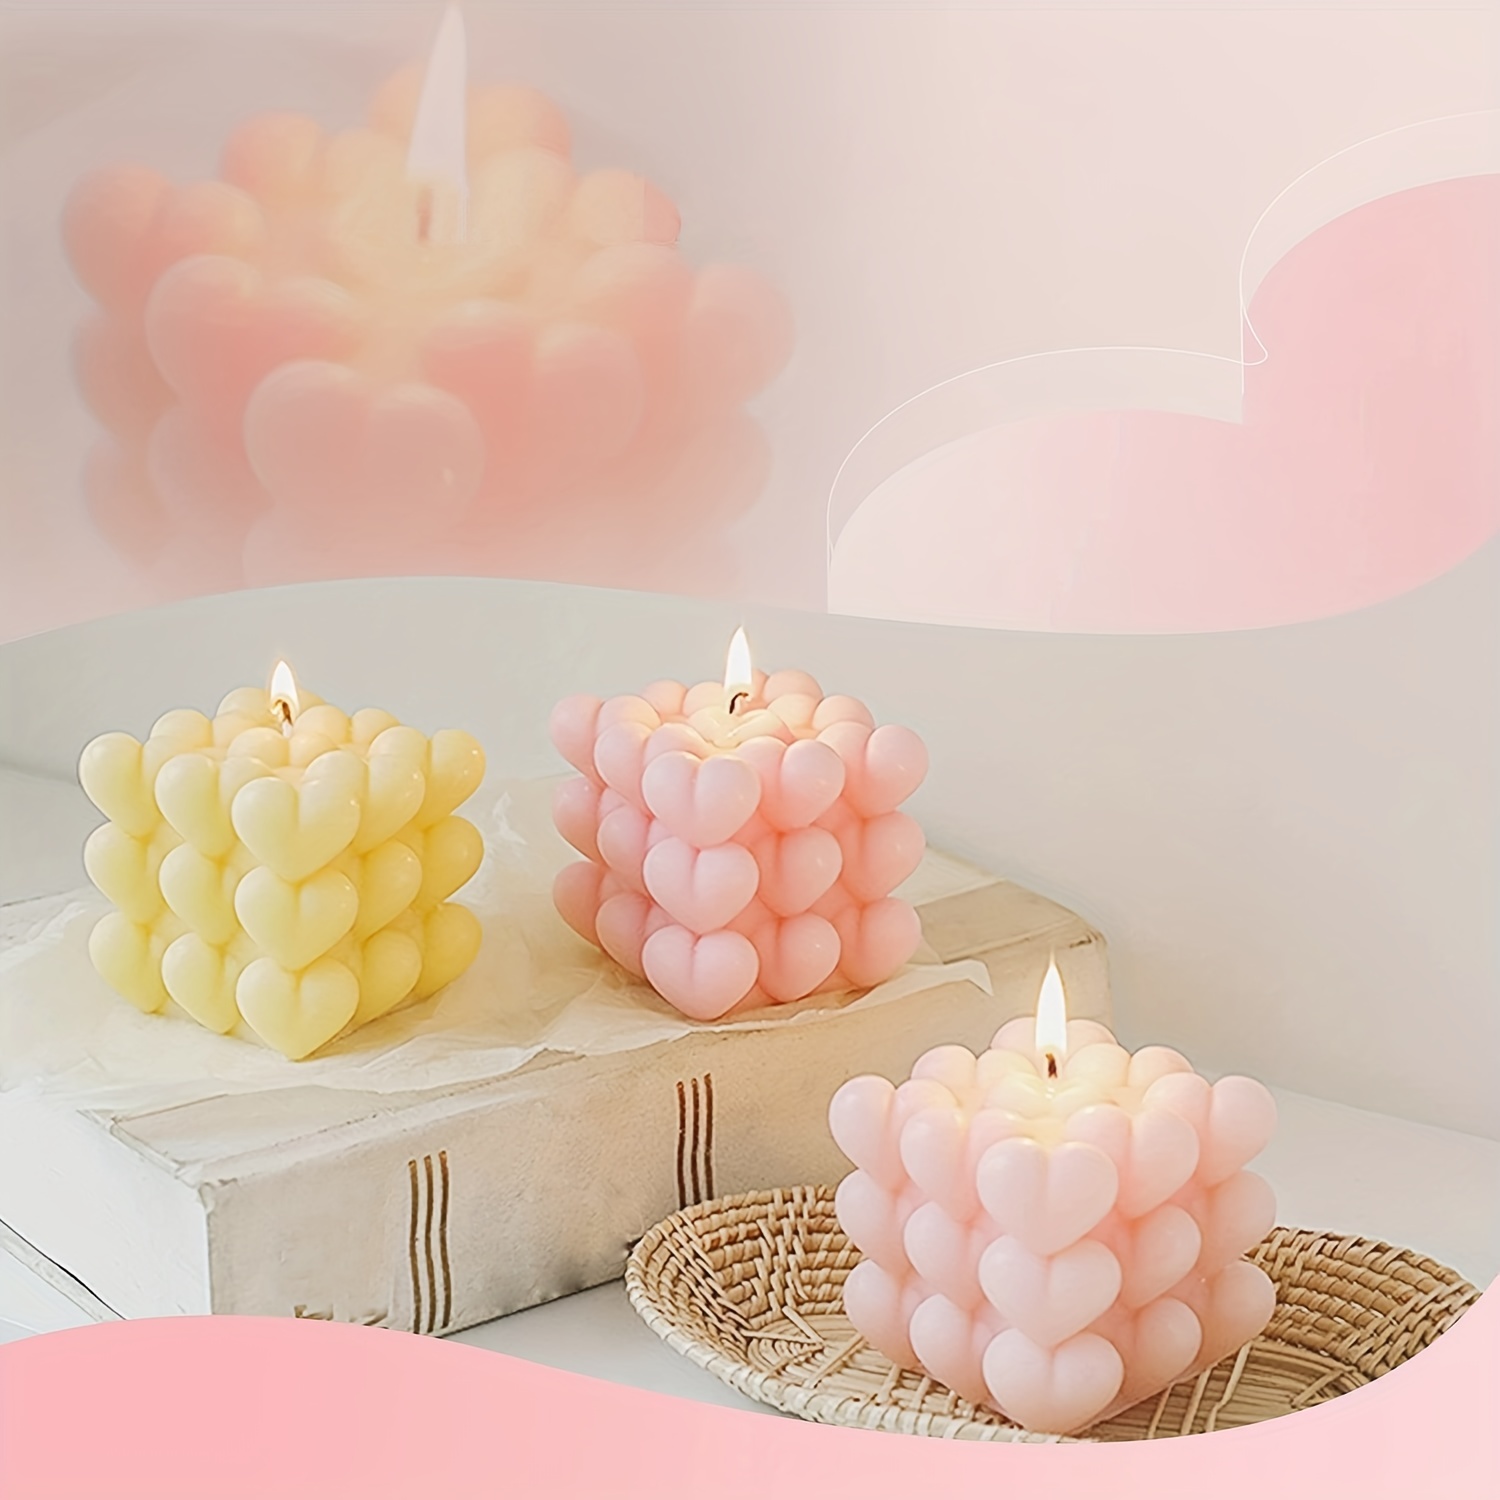 Candle Molds - Silicone Mold for Candles Making, DIY 3D Moulds for Soy Wax,  Beeswax, Scented Candle, Valentine's Day Gifts (Christmas Tree)